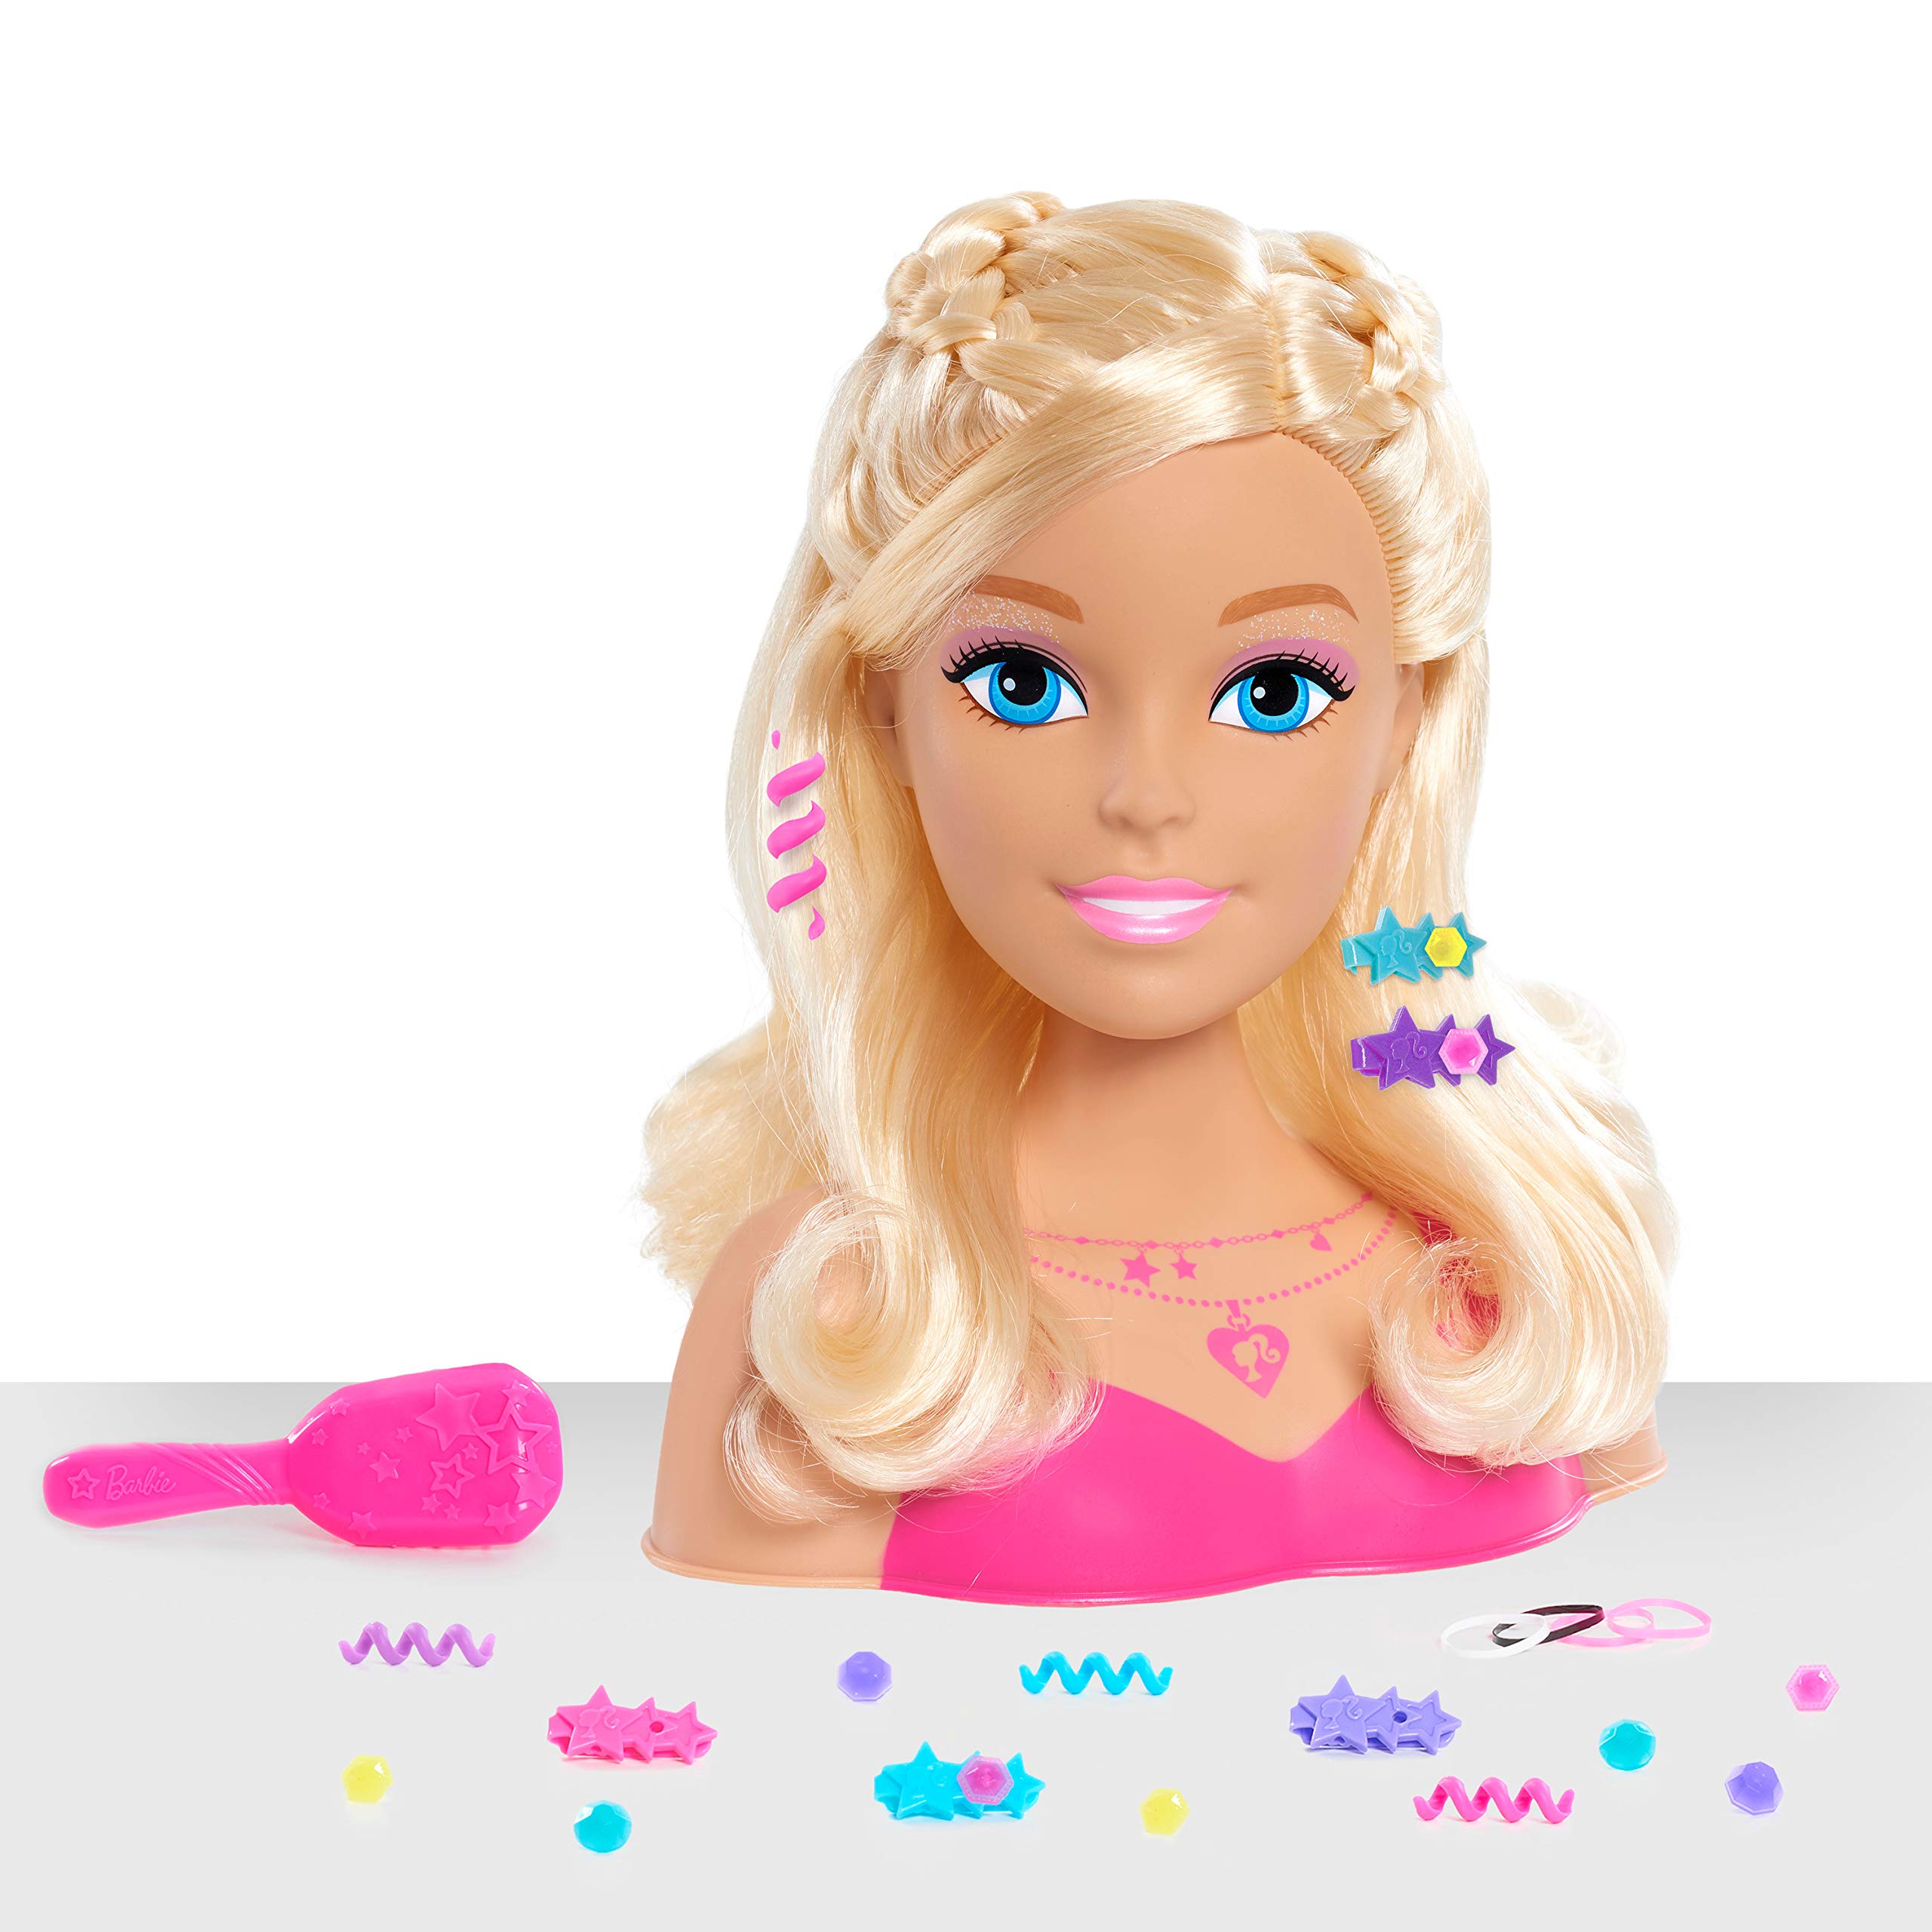 Barbie Fashionistas 8-Inch Styling Head, Blonde, 20 Pieces Include Styling Accessories, Hair Styling for Kids, Kids Toys for Ages 3 Up by Just Play $7.97 Amazon